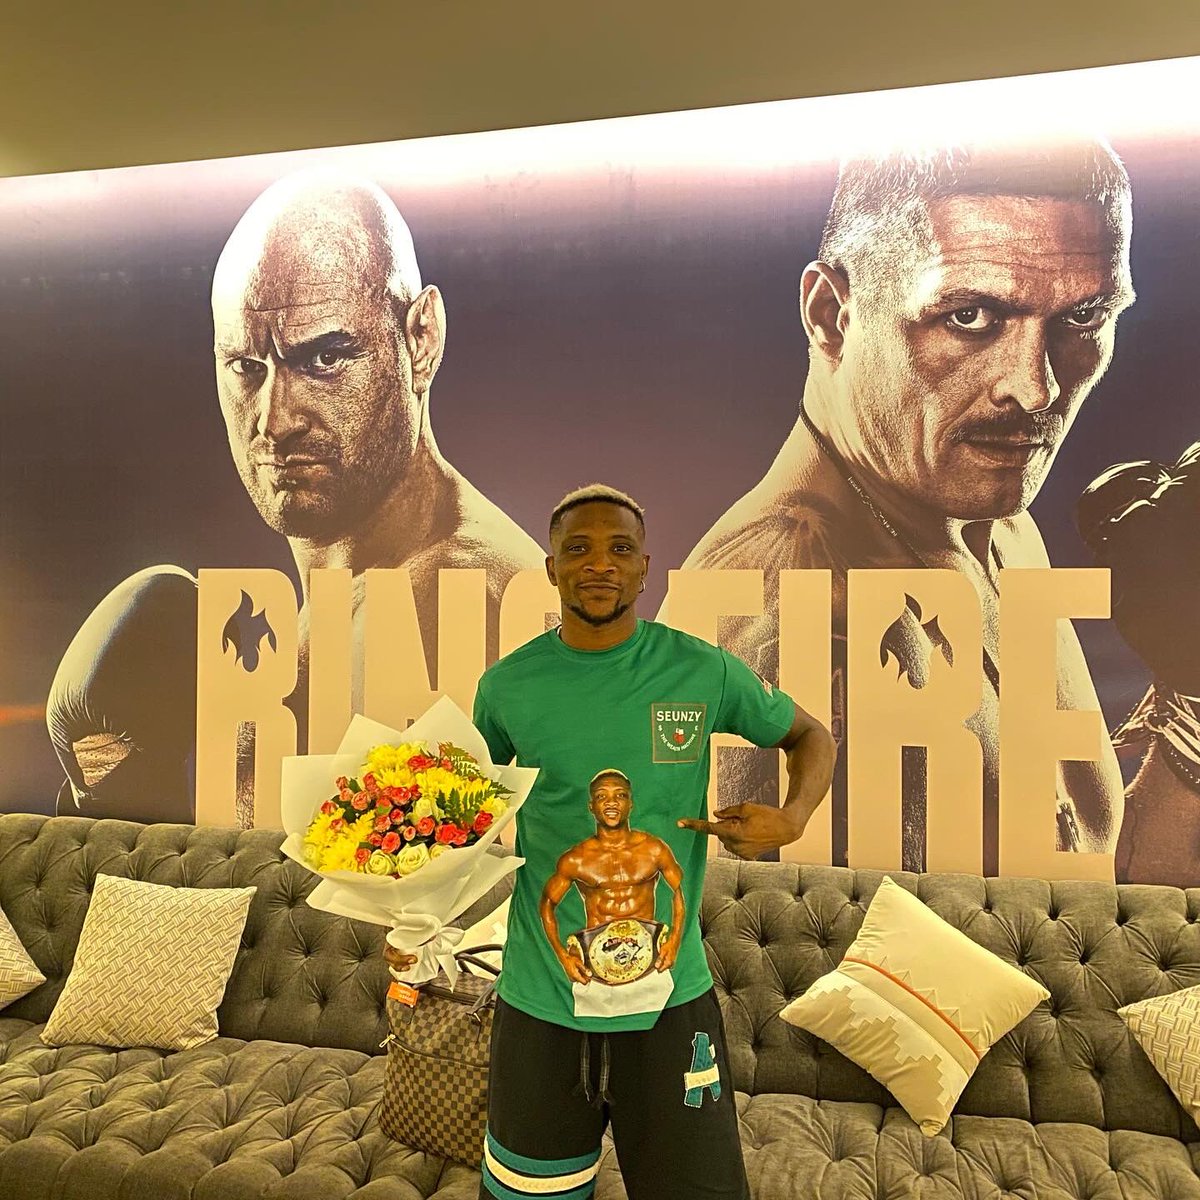 Arrived in Riyadh safely with my team and really proud to be representing my country Nigeria 🇳🇬 Ghana 🇬🇭 and the whole of Africa 🌍 in this historic event. Victory will be ours!!!!! @DiBellaEnt @Queensberry @trboxeo @Turki_alalshikh #furyusyk #RiyadhSeason #RingOfFire 🇳🇬❤️🇬🇭